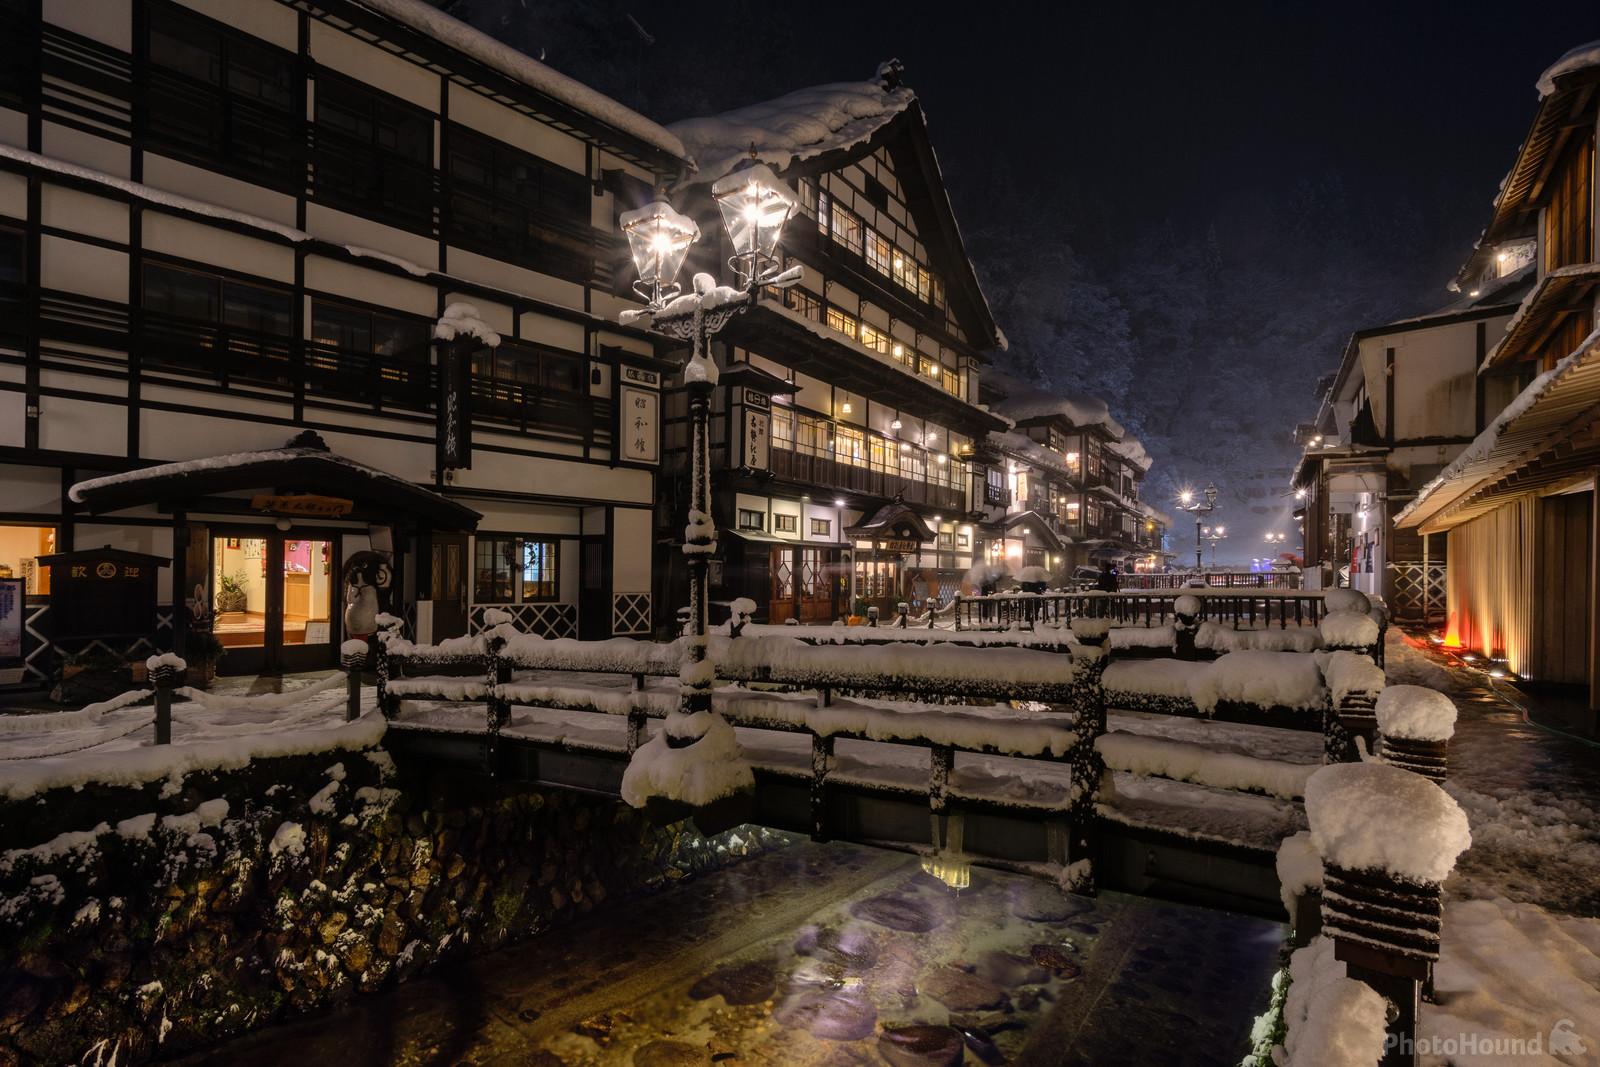 Image of Ginzan Onsen by Colette English